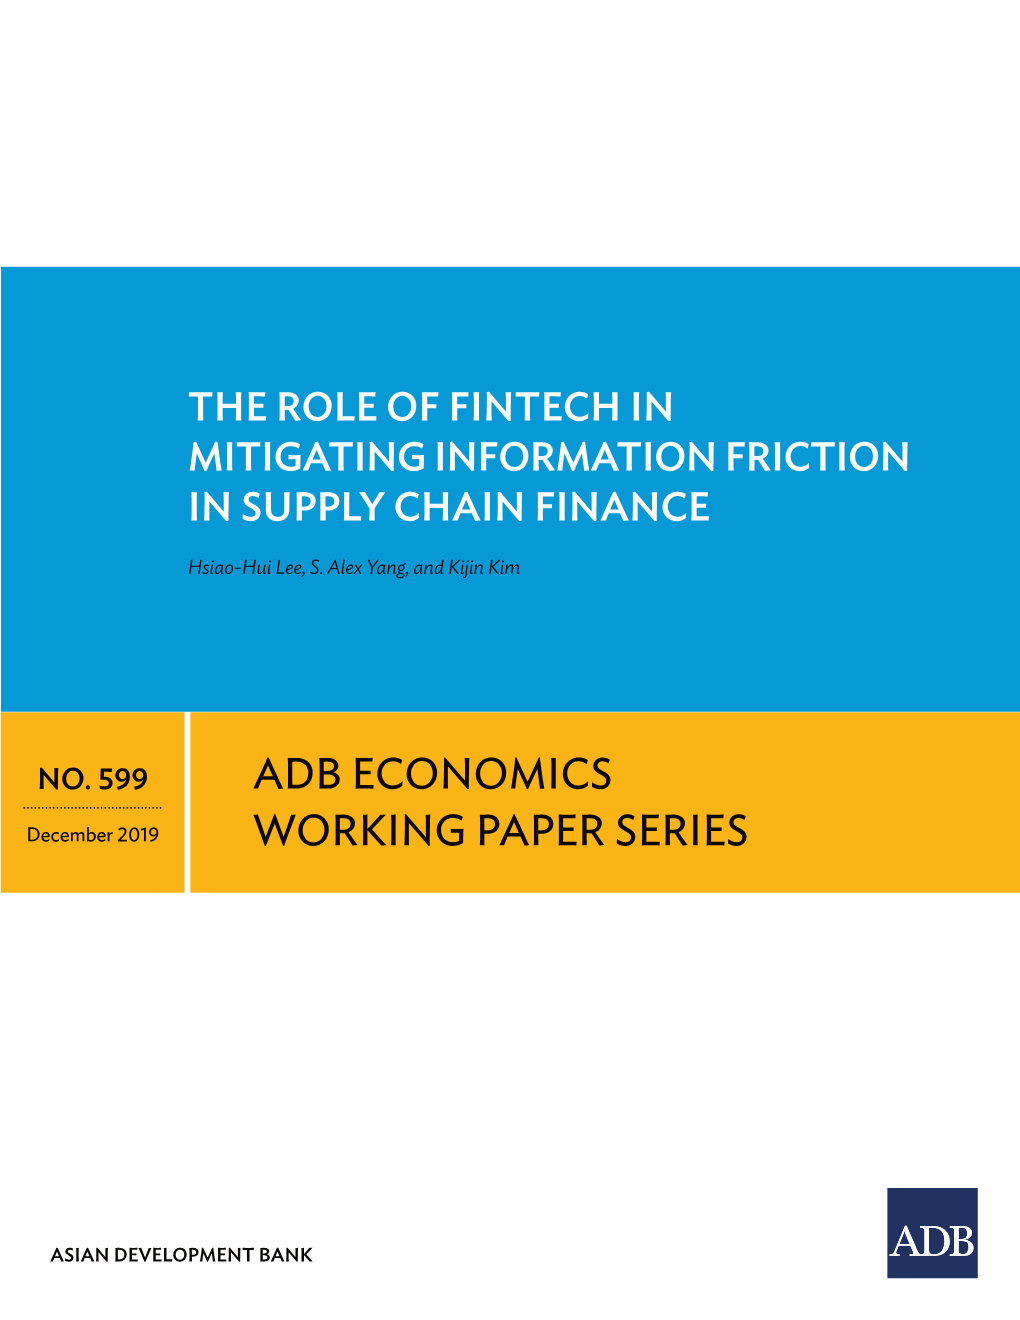 The Role of Fintech in Mitigating Information Friction in Supply Chain Finance